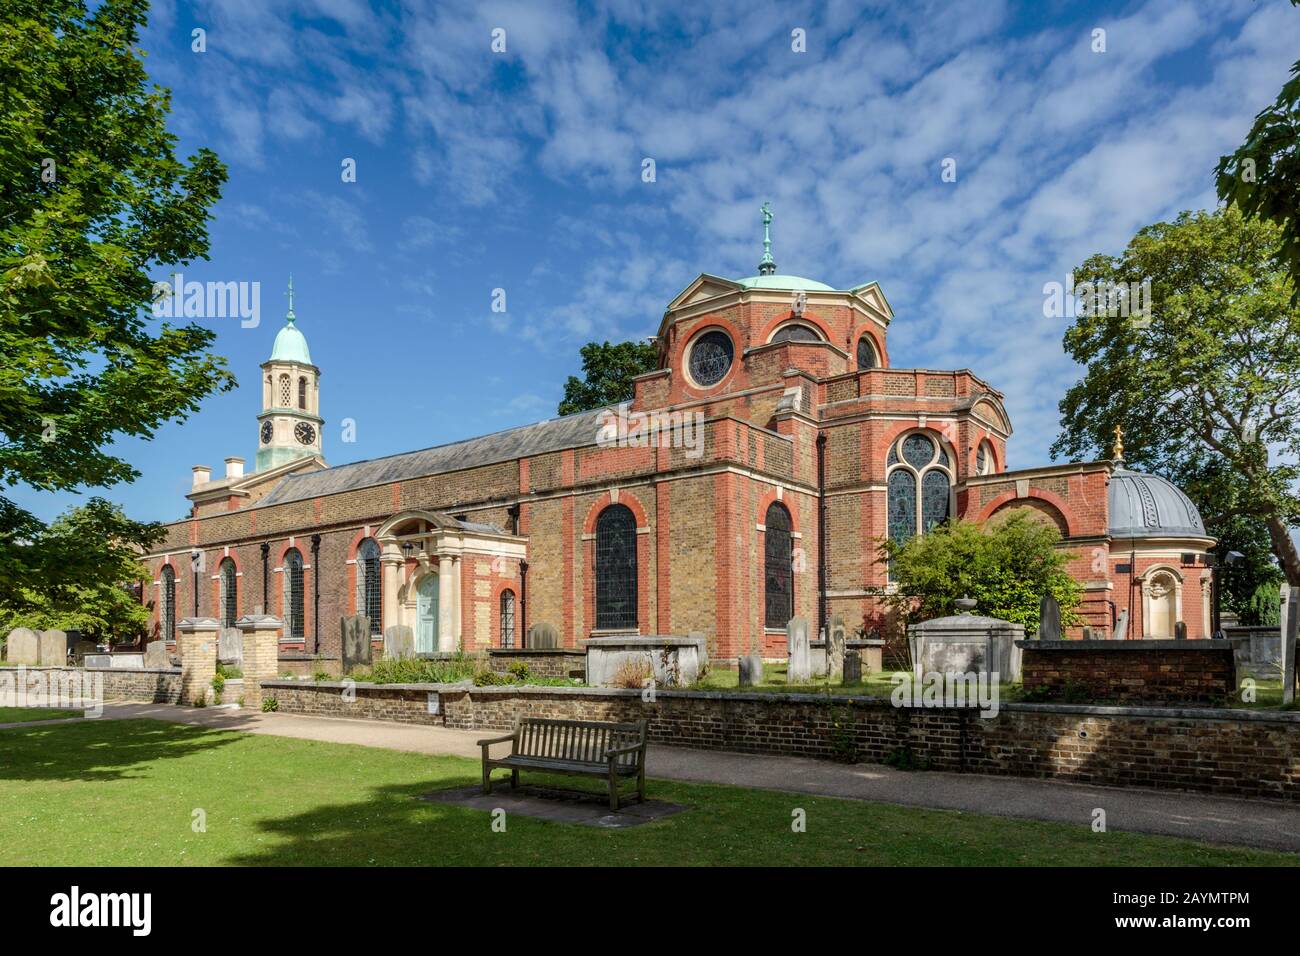 St Anne's Church is a parish church in Kew in the London Borough of Richmond upon Thames, West London. Stock Photo